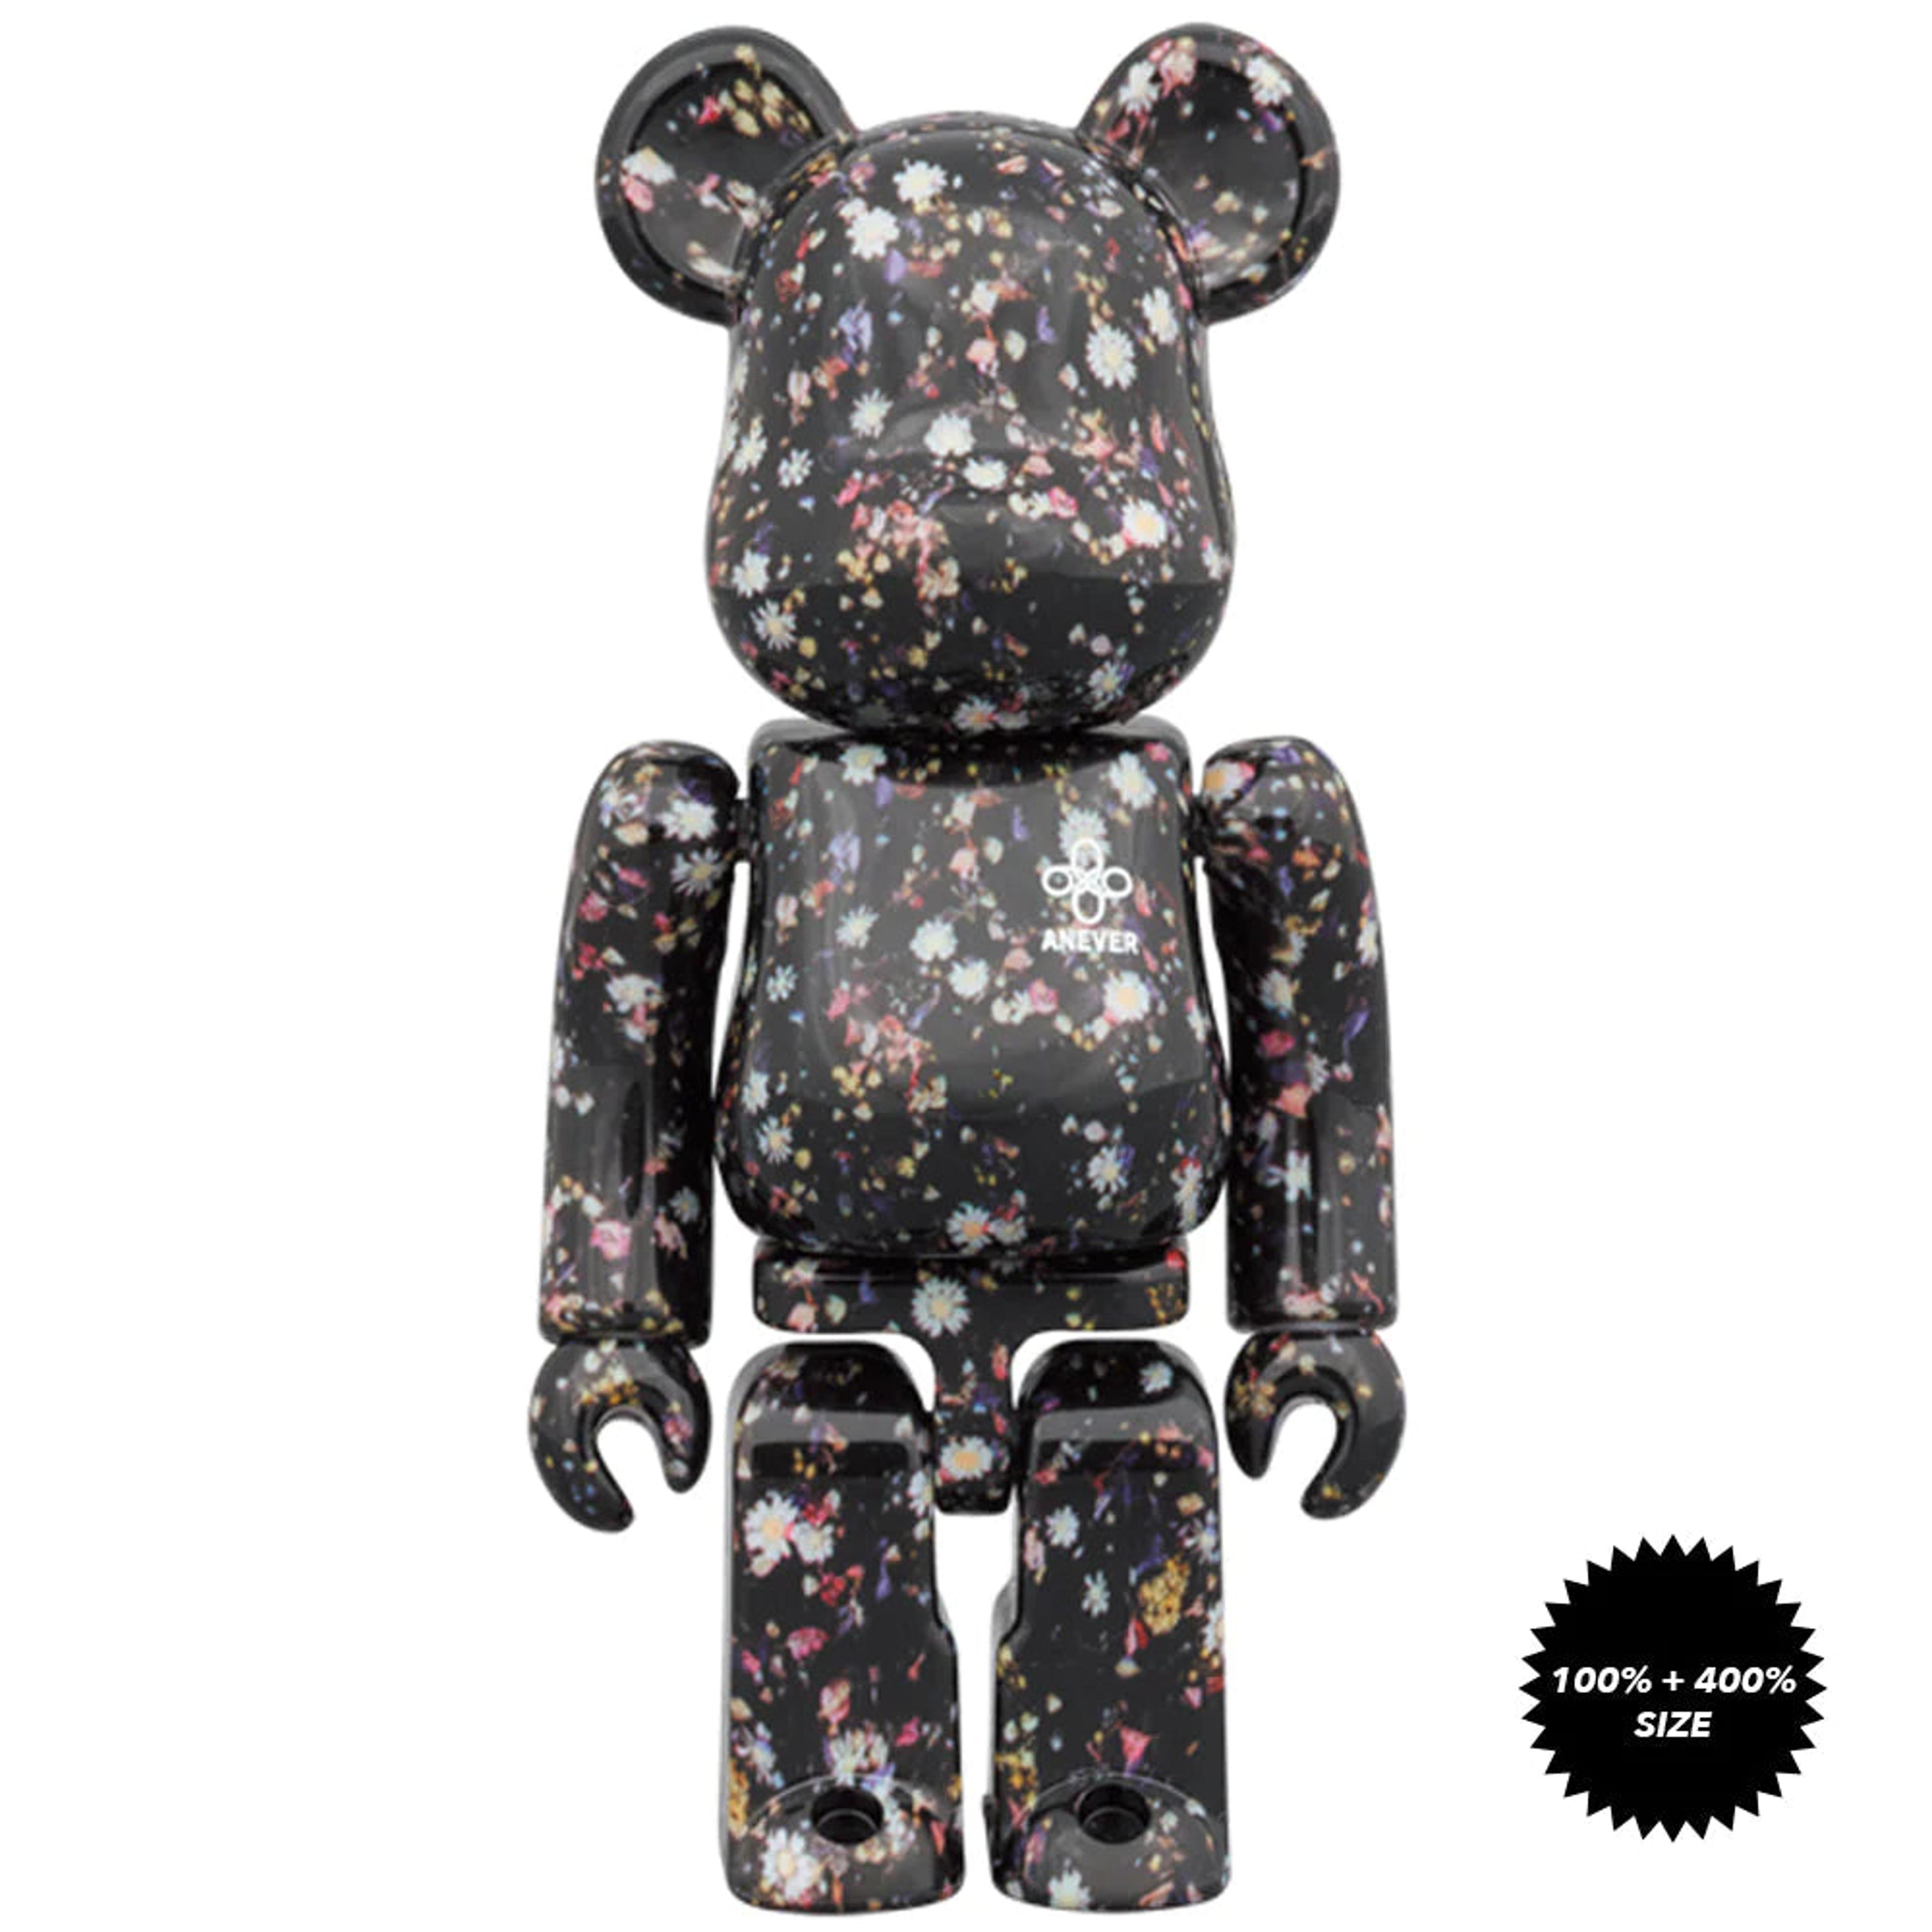 Alternate View 1 of BE@RBRICK ANEVER BLACK 400% + 100%